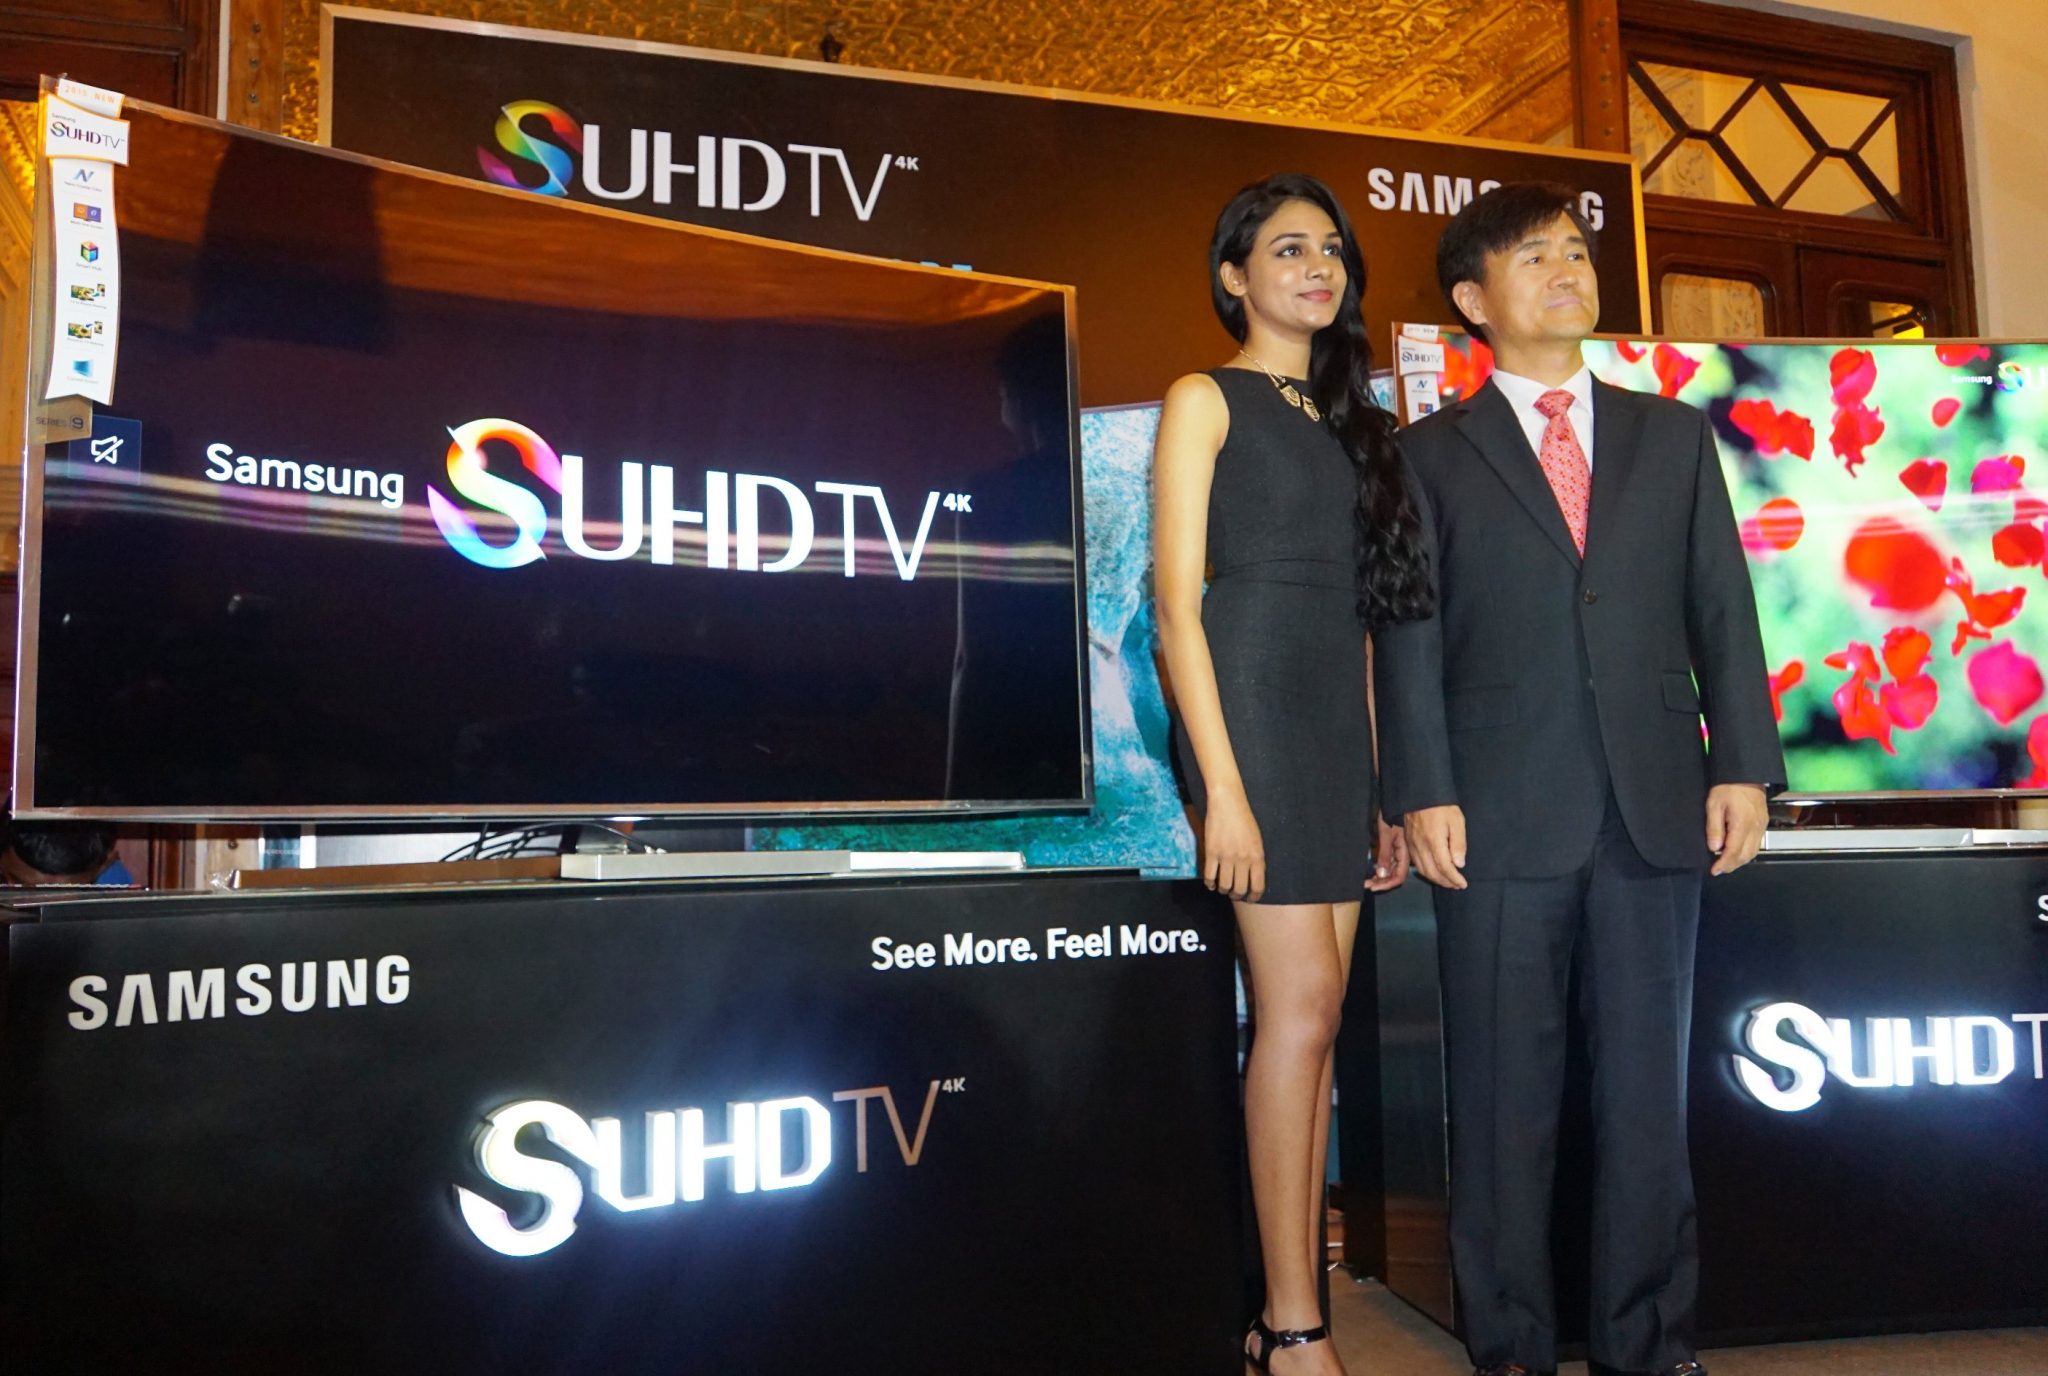 Image 1 - Samsung launches its all new SUHD Curved TVs in Sri Lanka